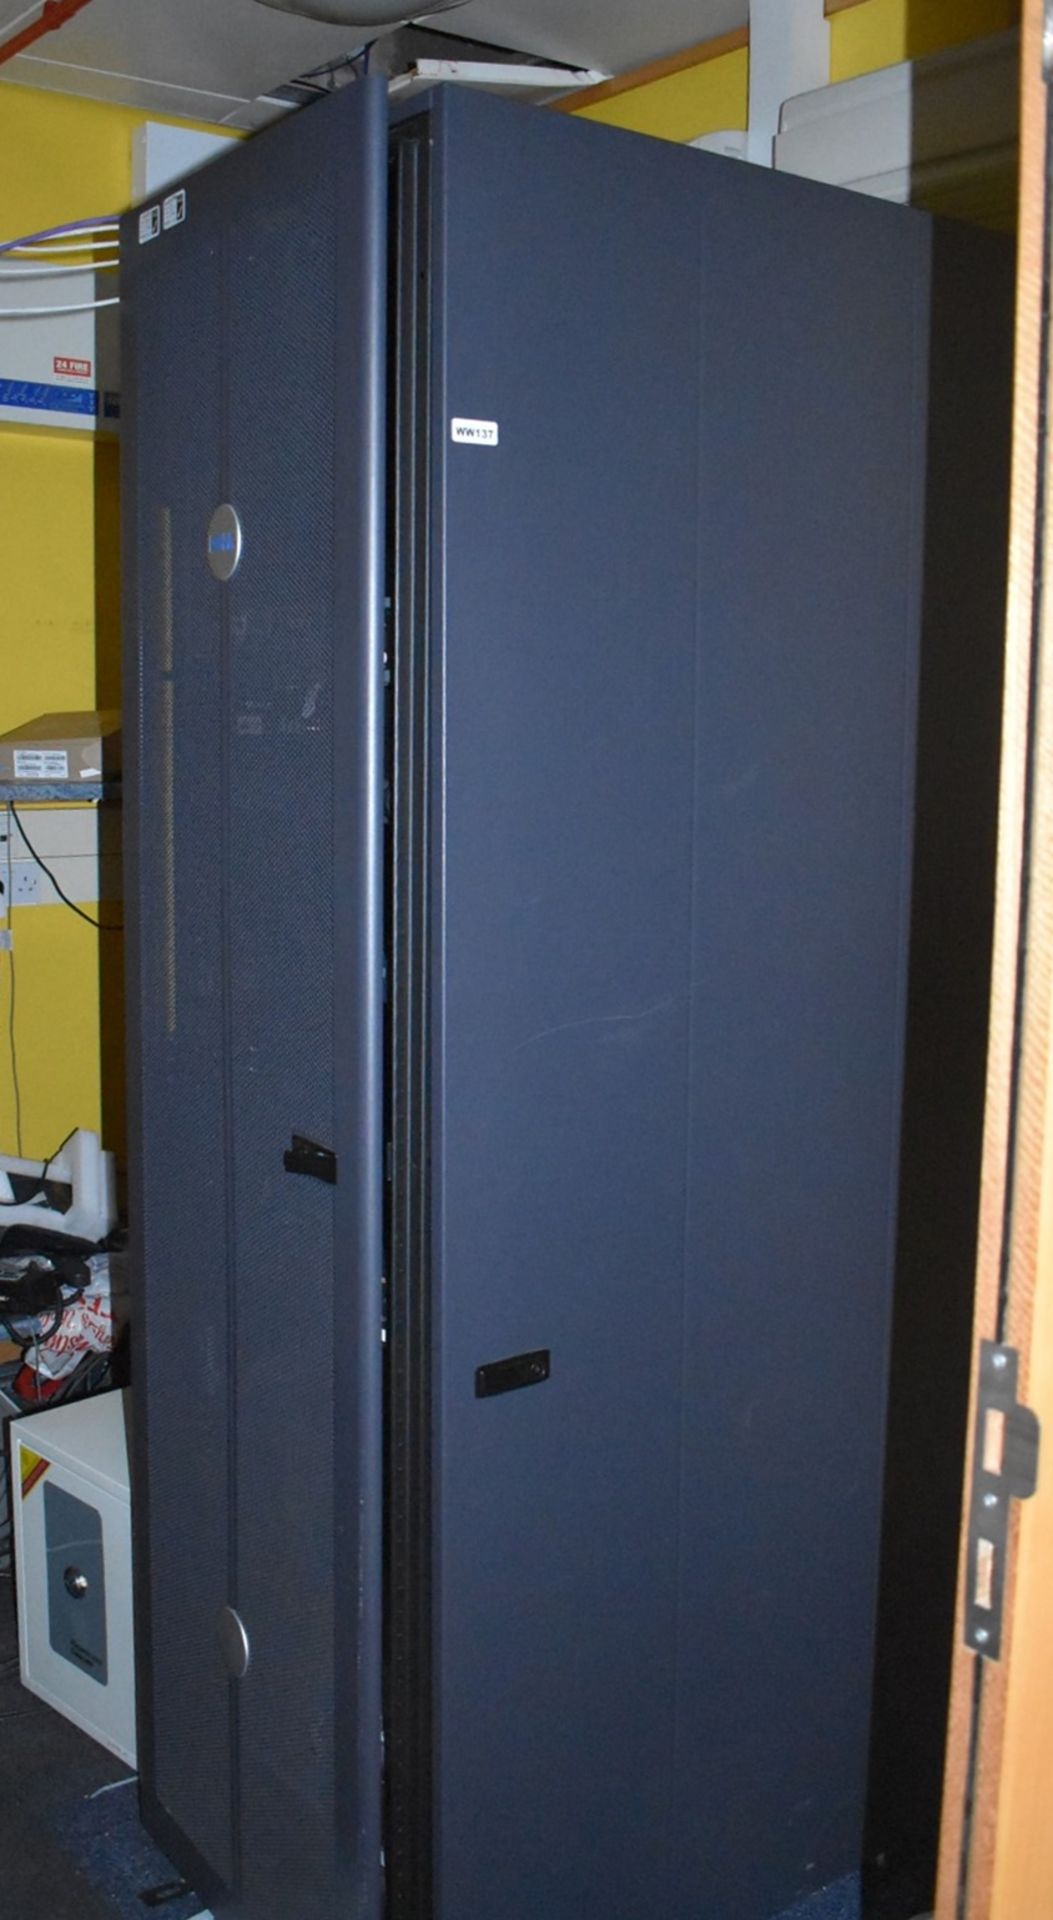 1 x Dell Server Rack Cabinet With Contents - Tape Drives, Omniview, APC UPS and More - H200 x W60 - Image 12 of 19